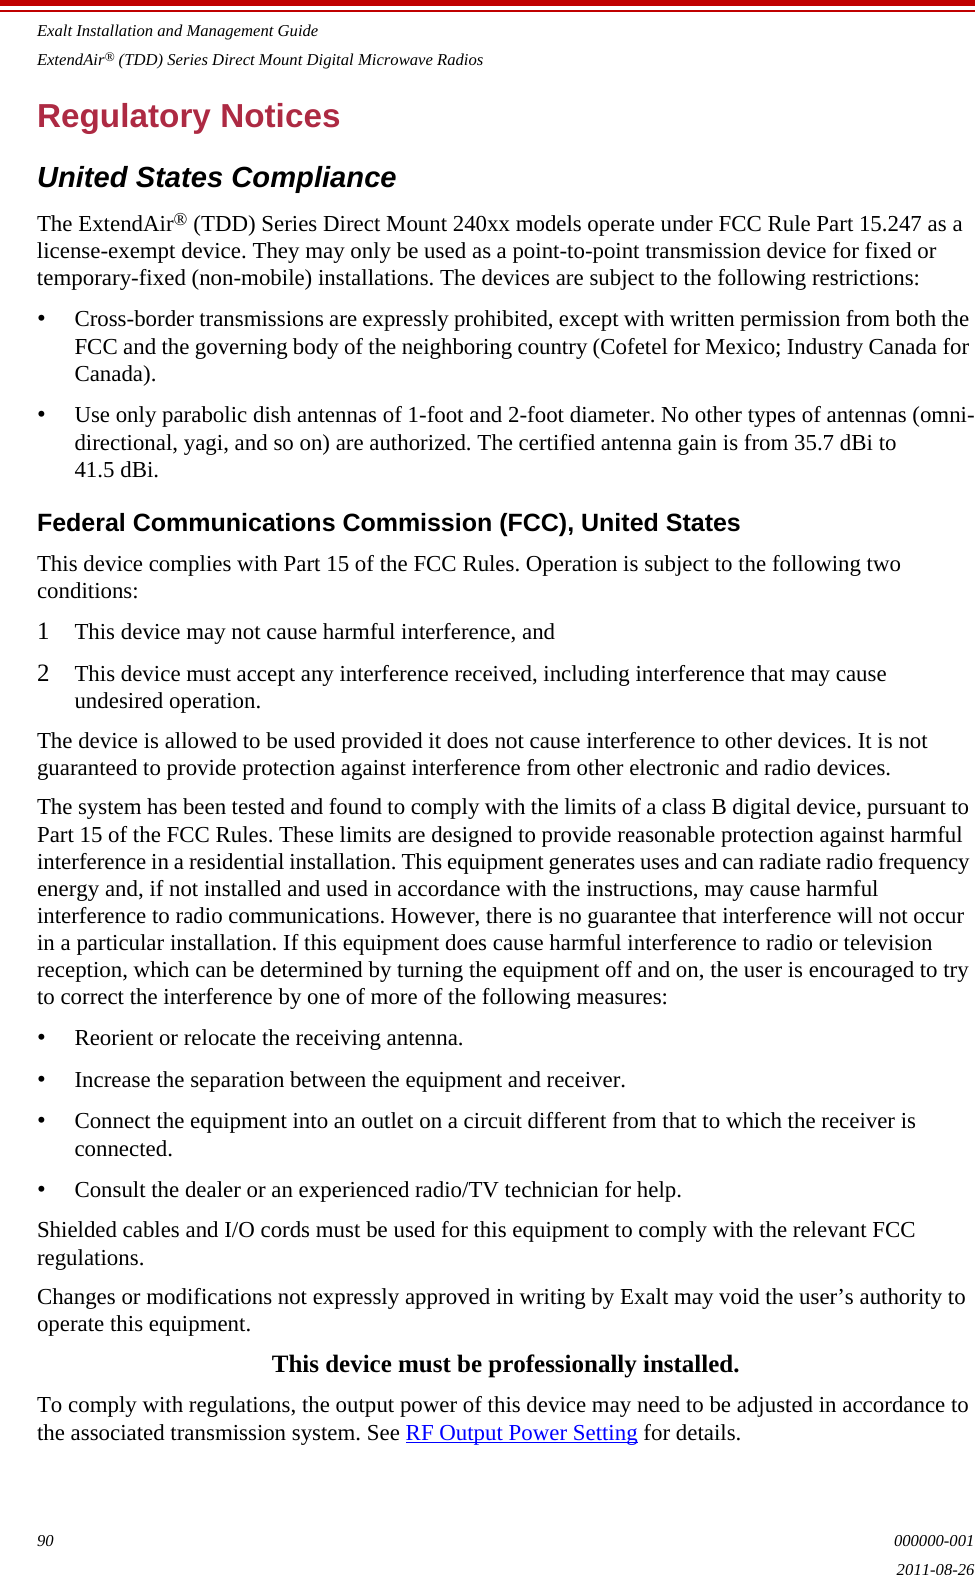 Exalt Installation and Management GuideExtendAir® (TDD) Series Direct Mount Digital Microwave Radios90 000000-0012011-08-26Regulatory NoticesUnited States ComplianceThe ExtendAir® (TDD) Series Direct Mount 240xx models operate under FCC Rule Part 15.247 as a license-exempt device. They may only be used as a point-to-point transmission device for fixed or temporary-fixed (non-mobile) installations. The devices are subject to the following restrictions:•Cross-border transmissions are expressly prohibited, except with written permission from both the FCC and the governing body of the neighboring country (Cofetel for Mexico; Industry Canada for Canada).•Use only parabolic dish antennas of 1-foot and 2-foot diameter. No other types of antennas (omni-directional, yagi, and so on) are authorized. The certified antenna gain is from 35.7 dBi to 41.5 dBi.Federal Communications Commission (FCC), United StatesThis device complies with Part 15 of the FCC Rules. Operation is subject to the following two conditions:1This device may not cause harmful interference, and2This device must accept any interference received, including interference that may cause undesired operation.The device is allowed to be used provided it does not cause interference to other devices. It is not guaranteed to provide protection against interference from other electronic and radio devices.The system has been tested and found to comply with the limits of a class B digital device, pursuant to Part 15 of the FCC Rules. These limits are designed to provide reasonable protection against harmful interference in a residential installation. This equipment generates uses and can radiate radio frequency energy and, if not installed and used in accordance with the instructions, may cause harmful interference to radio communications. However, there is no guarantee that interference will not occur in a particular installation. If this equipment does cause harmful interference to radio or television reception, which can be determined by turning the equipment off and on, the user is encouraged to try to correct the interference by one of more of the following measures:•Reorient or relocate the receiving antenna.•Increase the separation between the equipment and receiver.•Connect the equipment into an outlet on a circuit different from that to which the receiver is connected.•Consult the dealer or an experienced radio/TV technician for help.Shielded cables and I/O cords must be used for this equipment to comply with the relevant FCC regulations.Changes or modifications not expressly approved in writing by Exalt may void the user’s authority to operate this equipment.This device must be professionally installed.To comply with regulations, the output power of this device may need to be adjusted in accordance to the associated transmission system. See RF Output Power Setting for details.